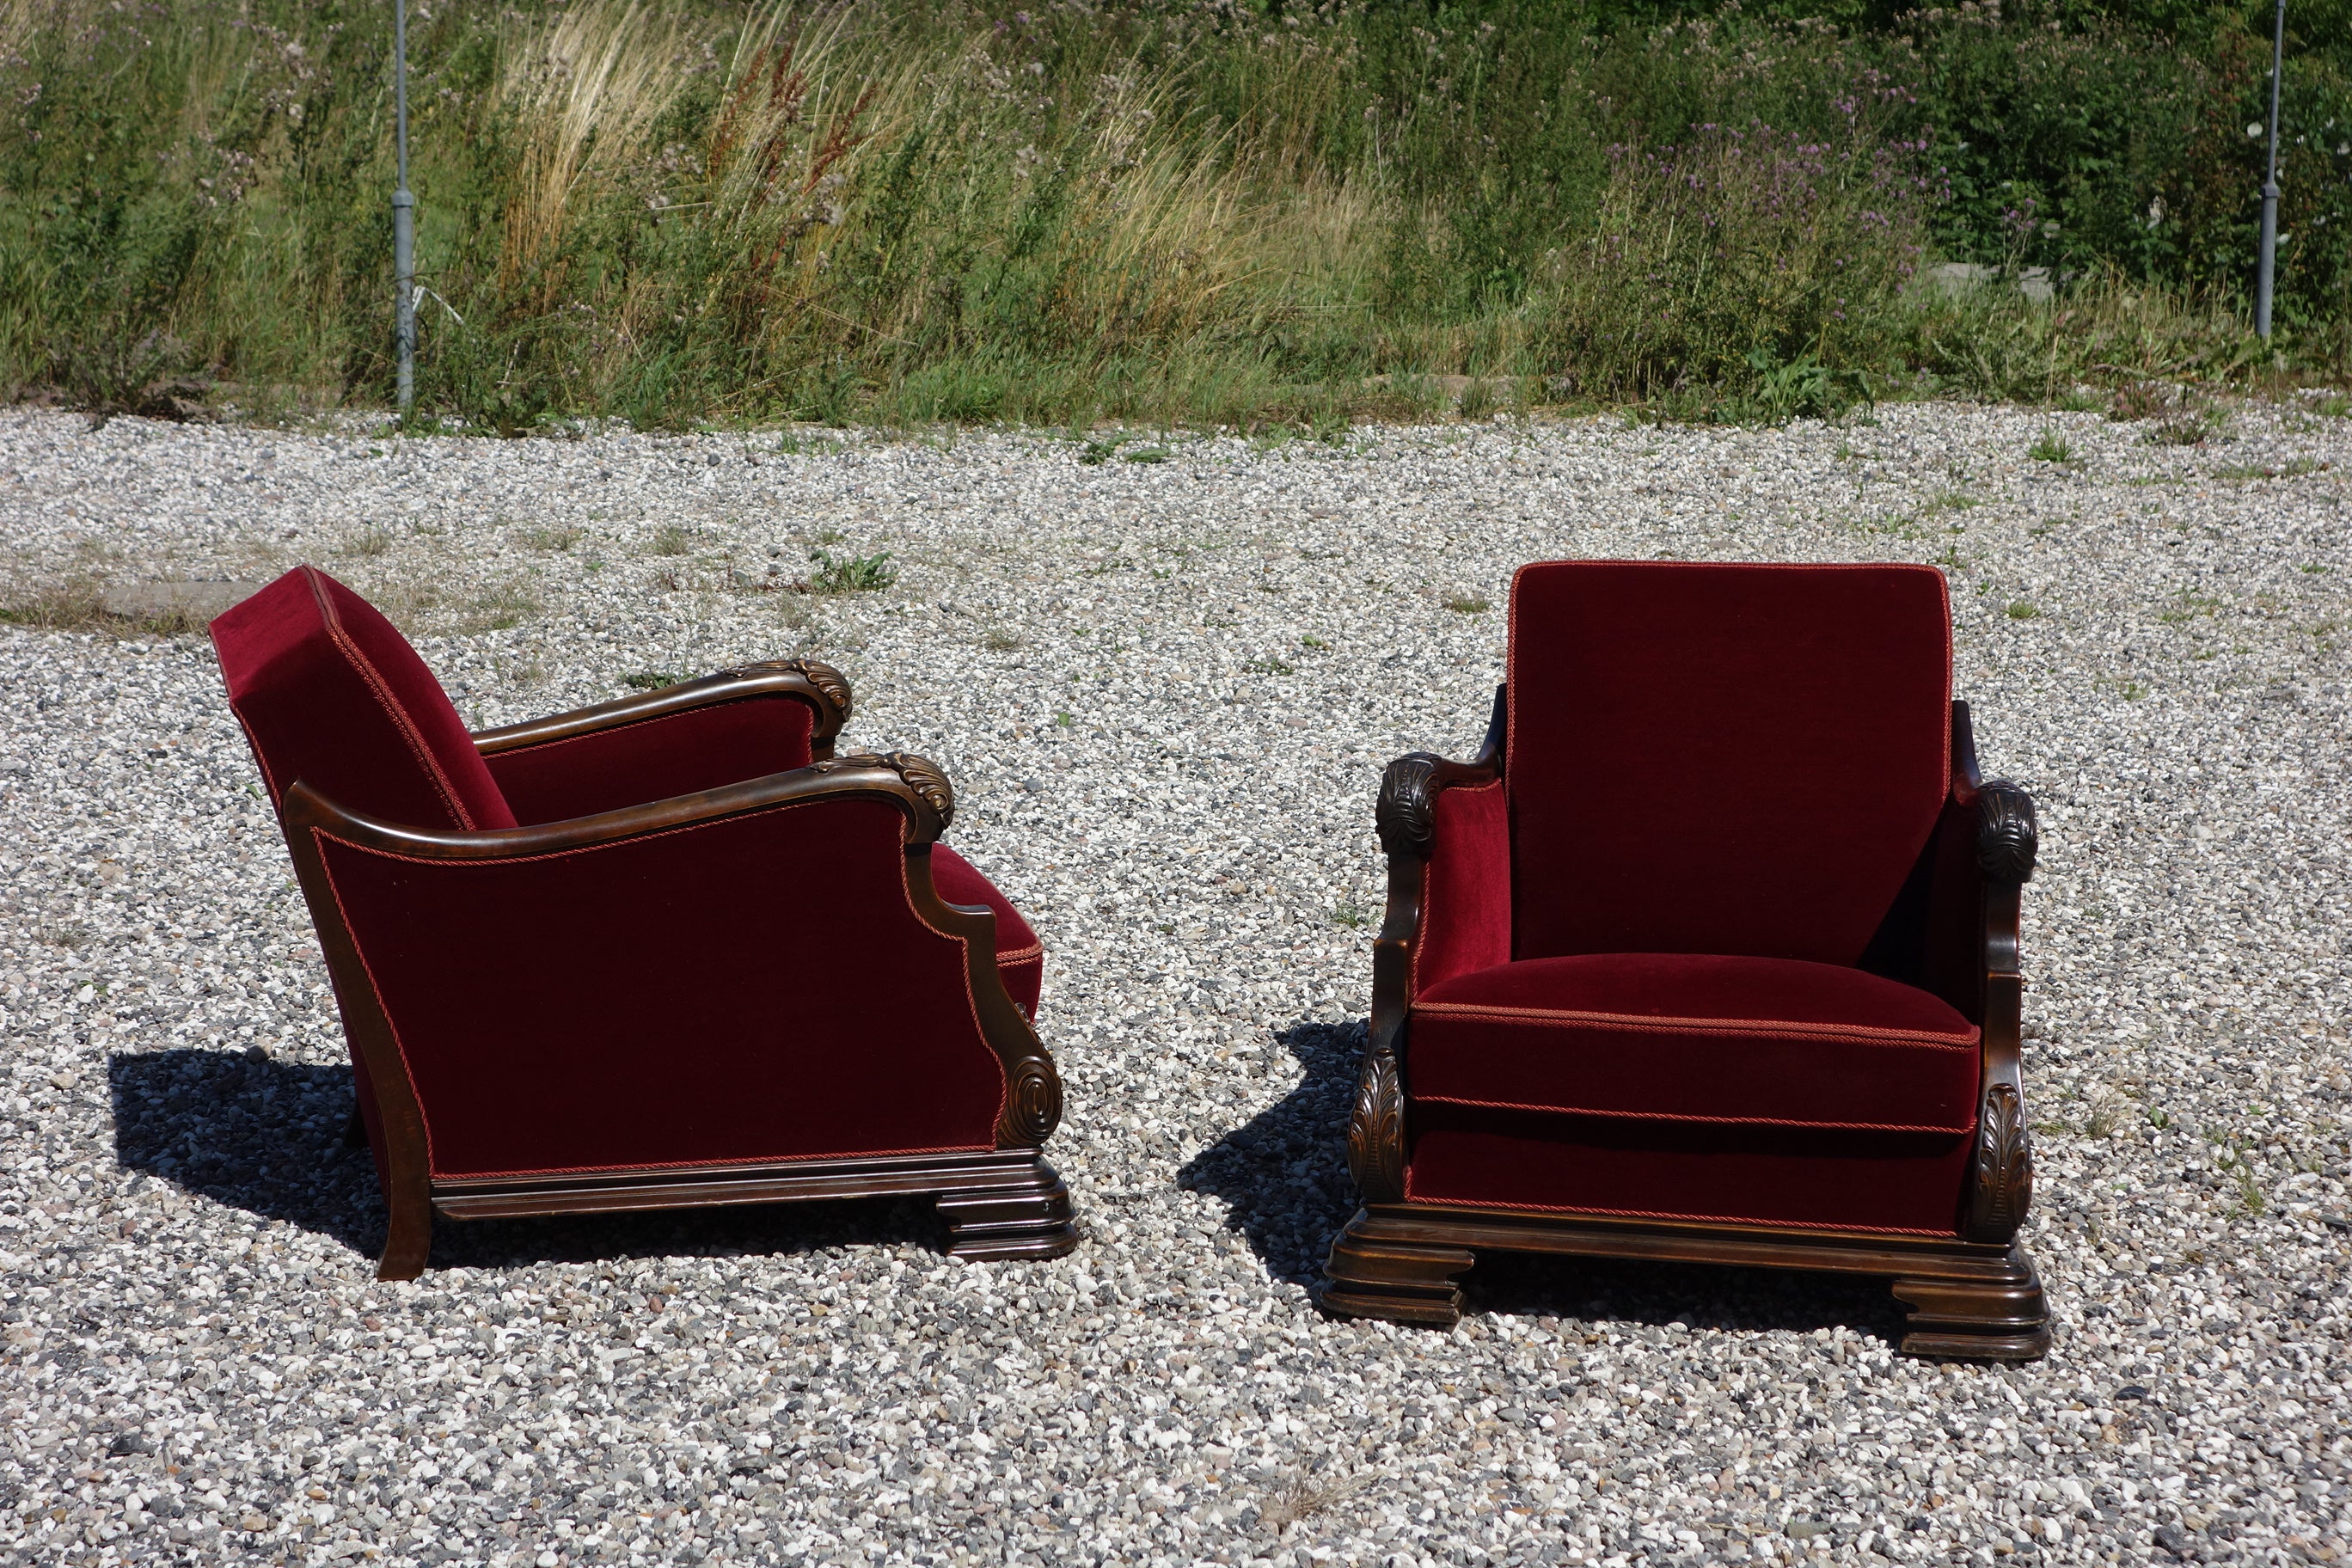 A fantastic pair of vintage Art Deco armchairs in heavy quality exclusive red velor. These chairs are large and offer comfortable seating. They are offered for sale individually but would make a stunning pair the right place.